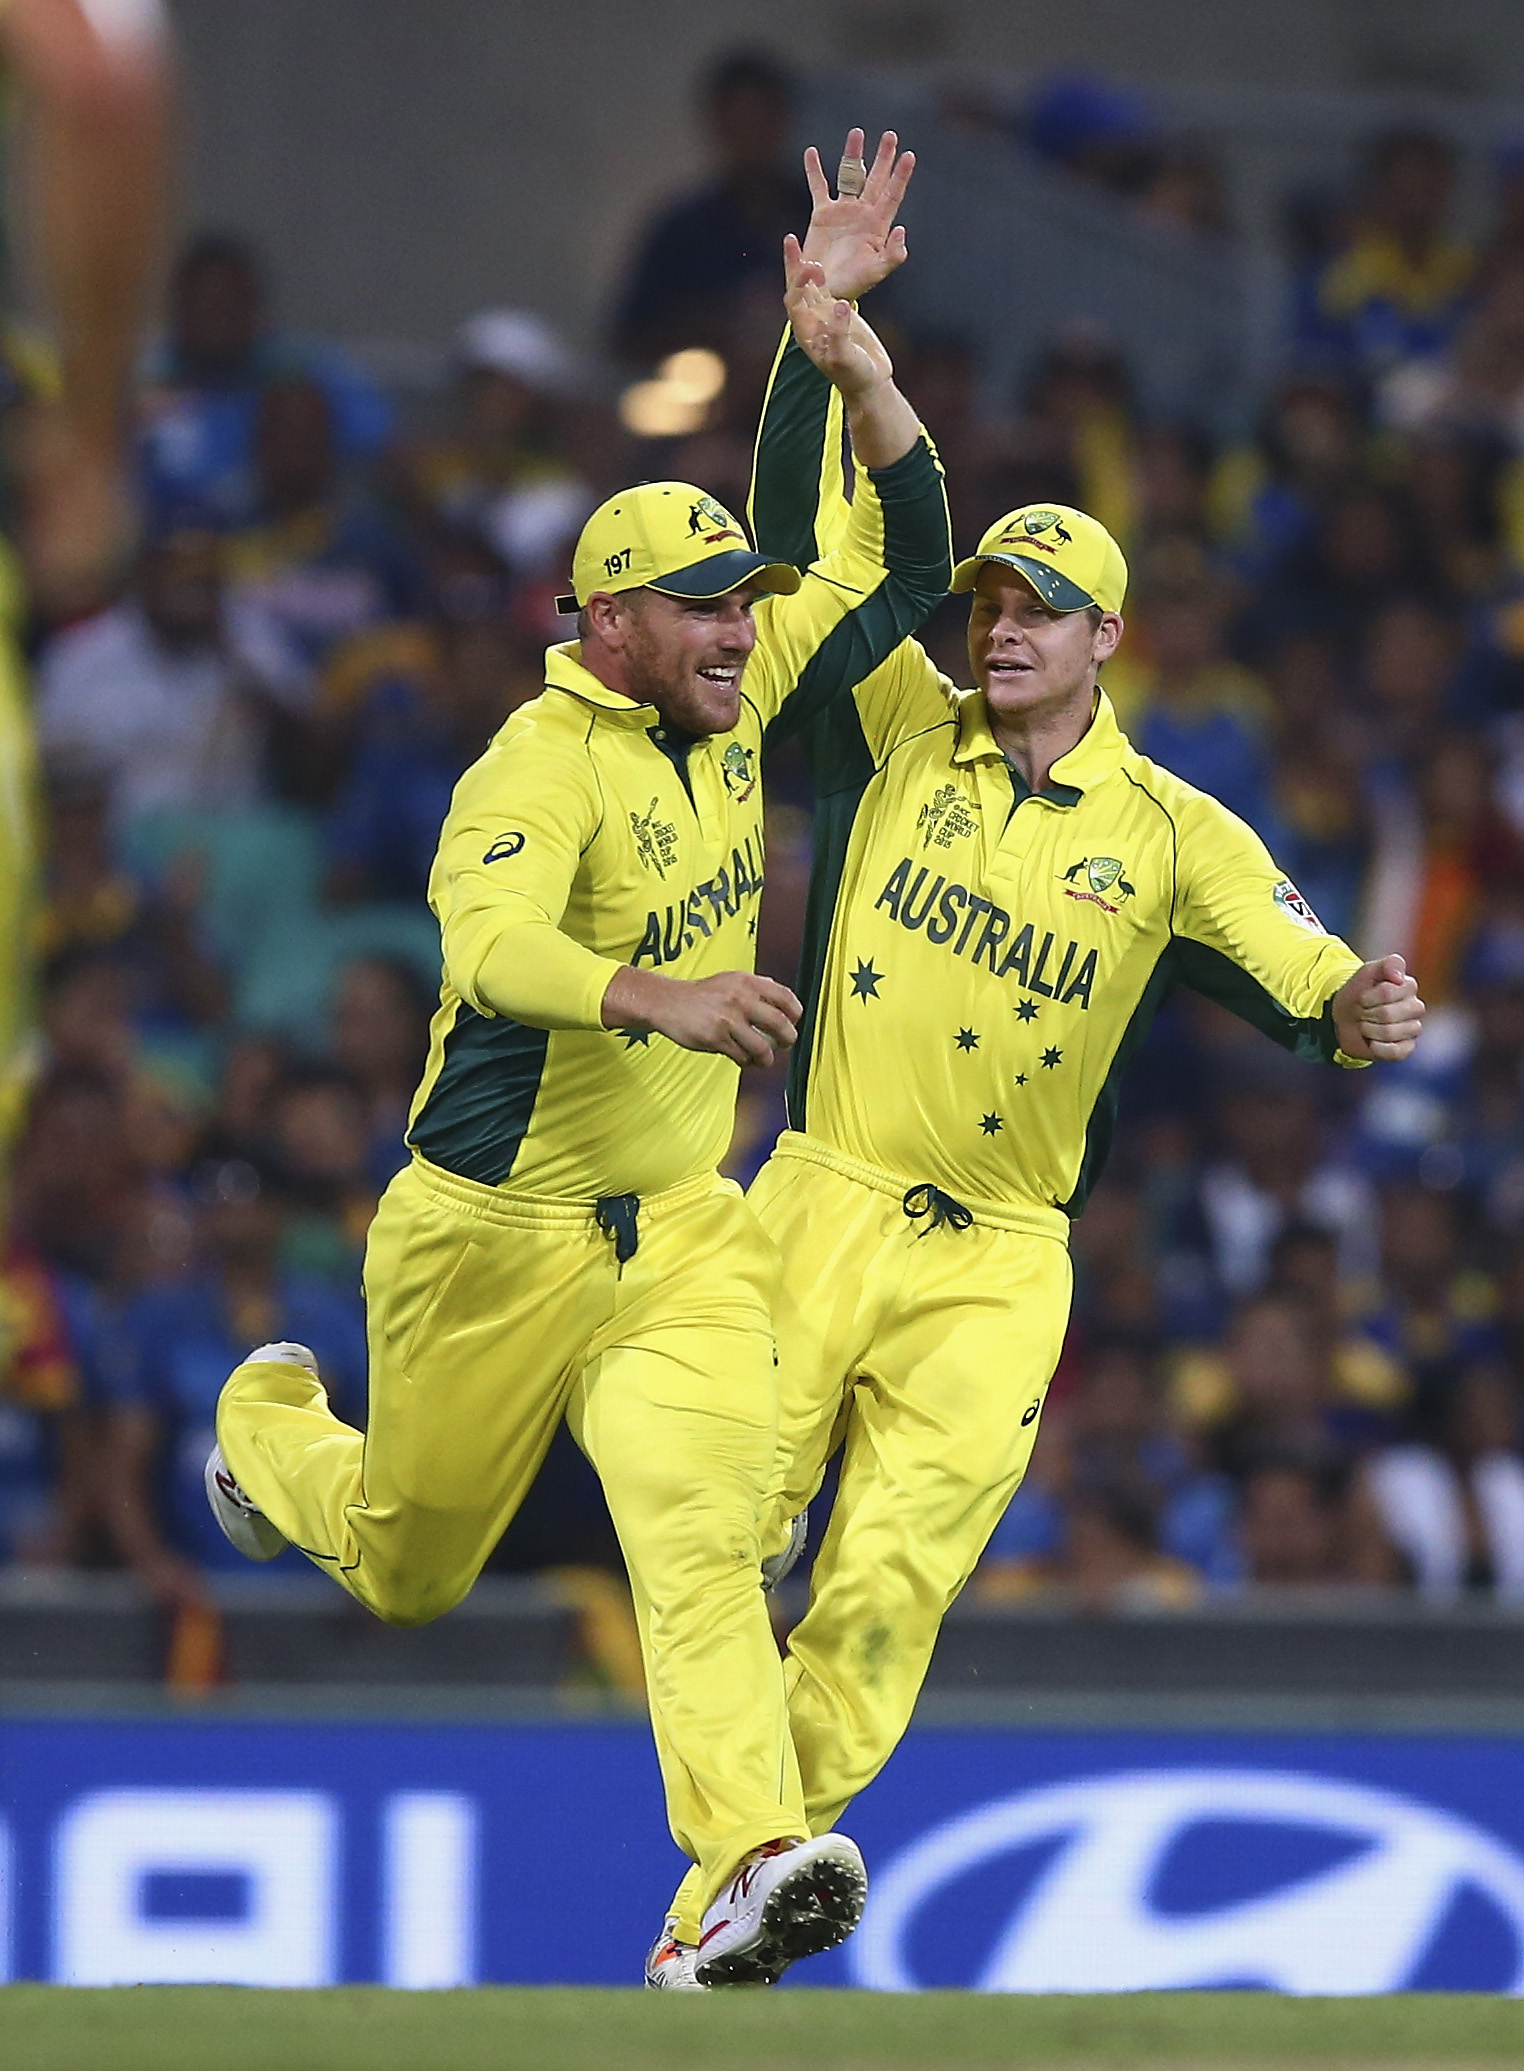 ICC World T20 2016: Steven Smith to lead Australia; Aaron Finch gets sacked